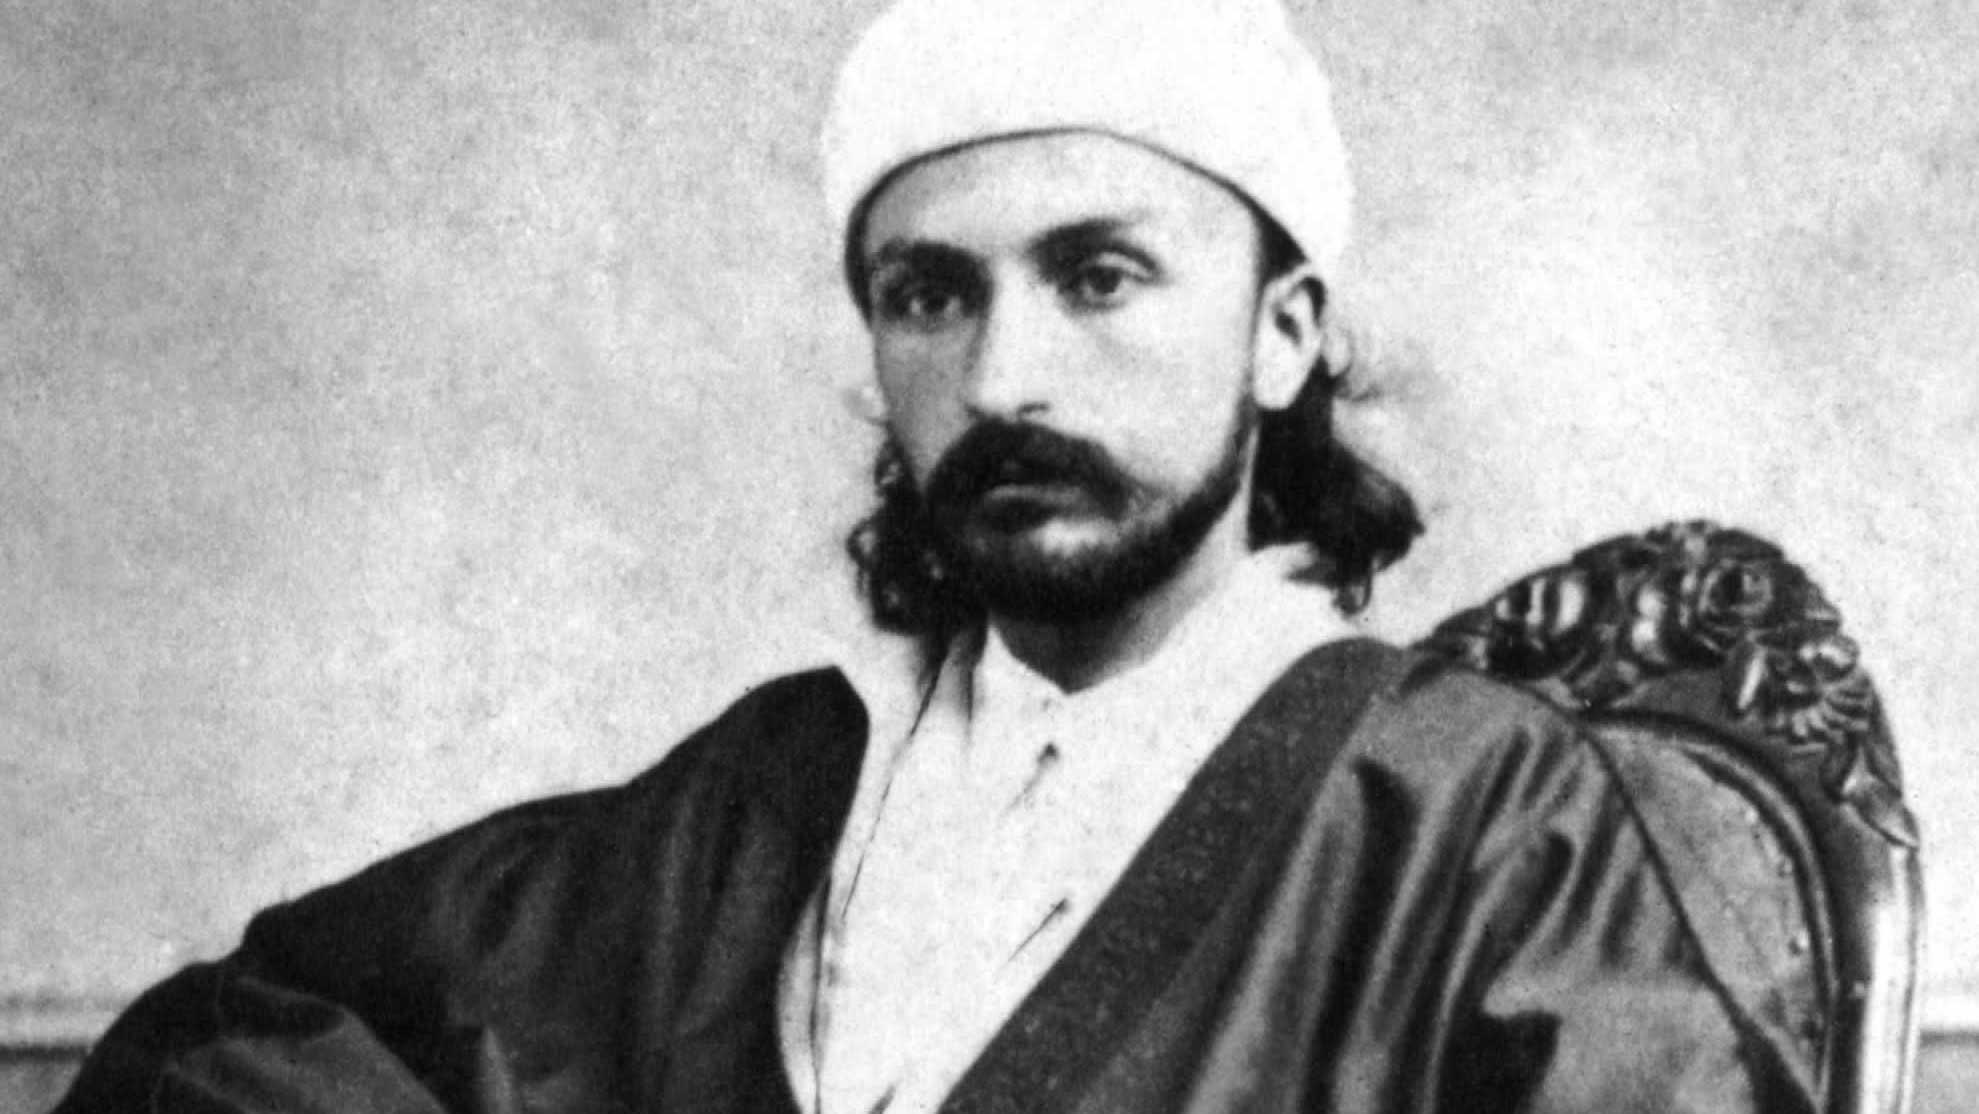 ‘Abdu’l-Bahá, as a young man, seated in a chair for an official portrait